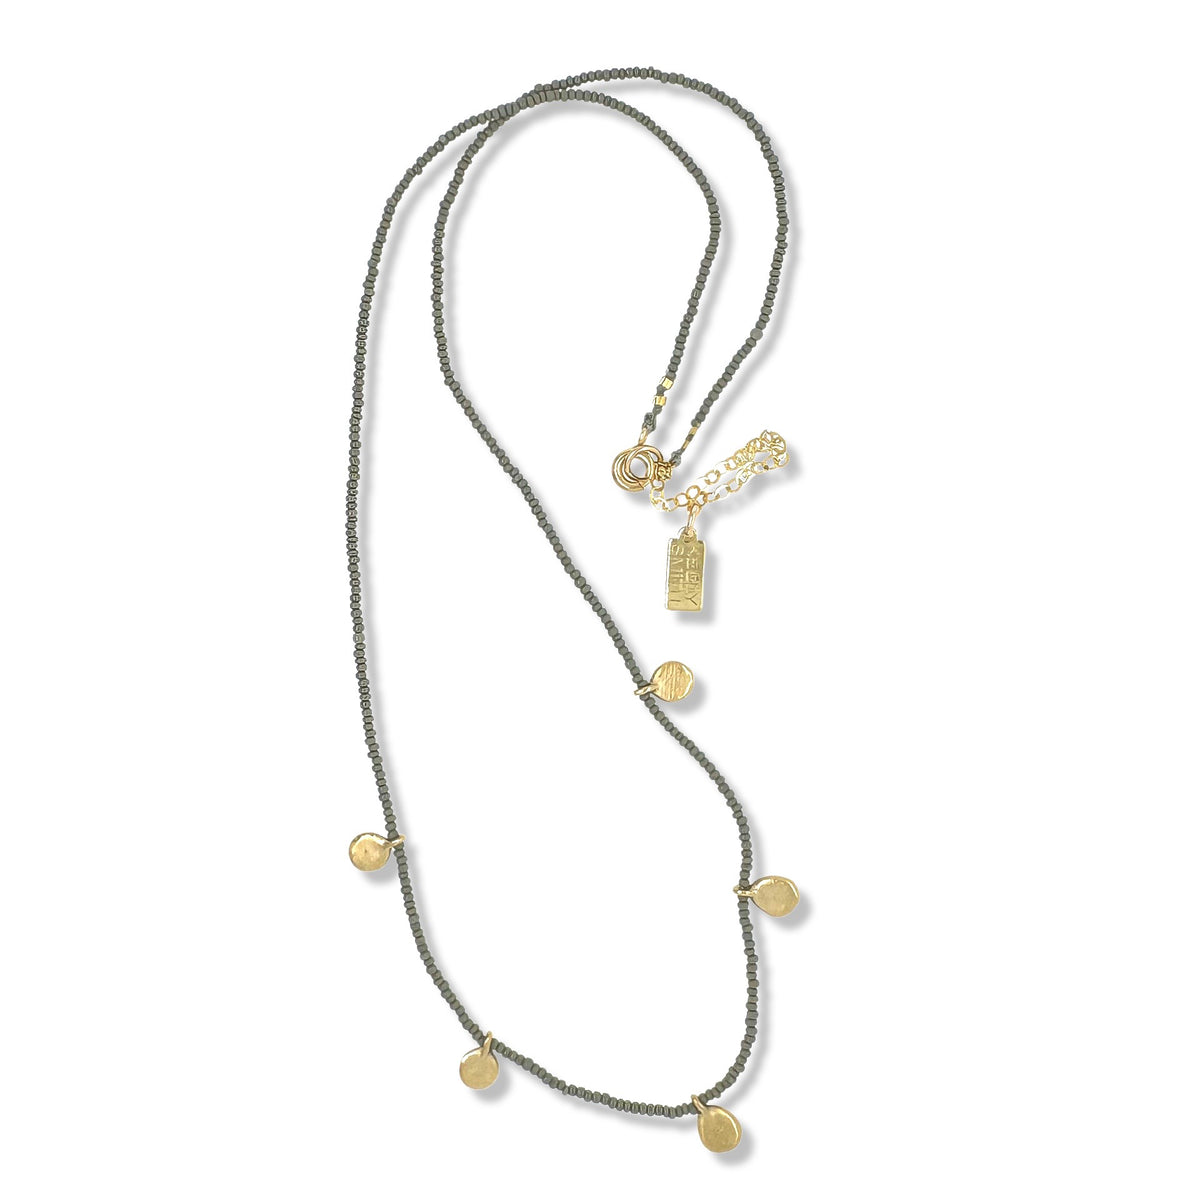 Dot Necklace In Gold On Charcoal Beads By Keely Smith Jewelry Designs